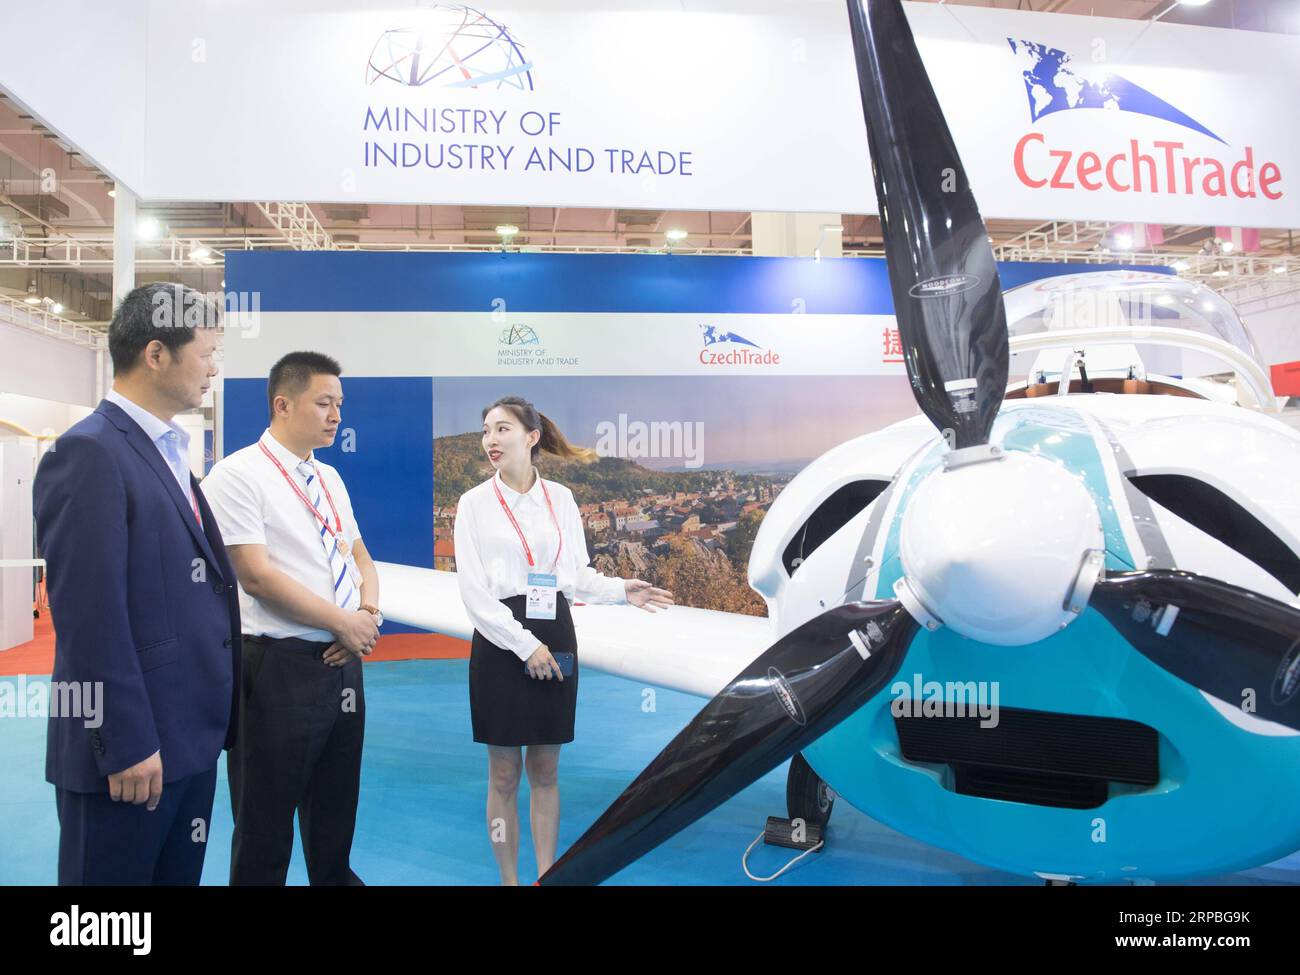 https://c8.alamy.com/comp/2RPBG9K/190608-ningbo-june-8-2019-xinhua-an-exhibitor-r-introduces-a-light-aircraft-made-in-the-czech-republic-during-china-central-eastern-european-countries-ceec-expo-international-consumer-goods-fair-in-ningbo-east-china-s-zhejiang-province-june-8-2019-with-the-theme-of-deepening-open-cooperation-working-together-for-mutual-benefit-and-win-win-the-first-china-ceec-expo-and-international-consumer-goods-fair-is-held-from-june-8-to-12-in-ningbo-xinhuaweng-xinyang-china-zhejiang-ningbo-china-ceec-expo-cn-publicationxnotxinxchn-2RPBG9K.jpg